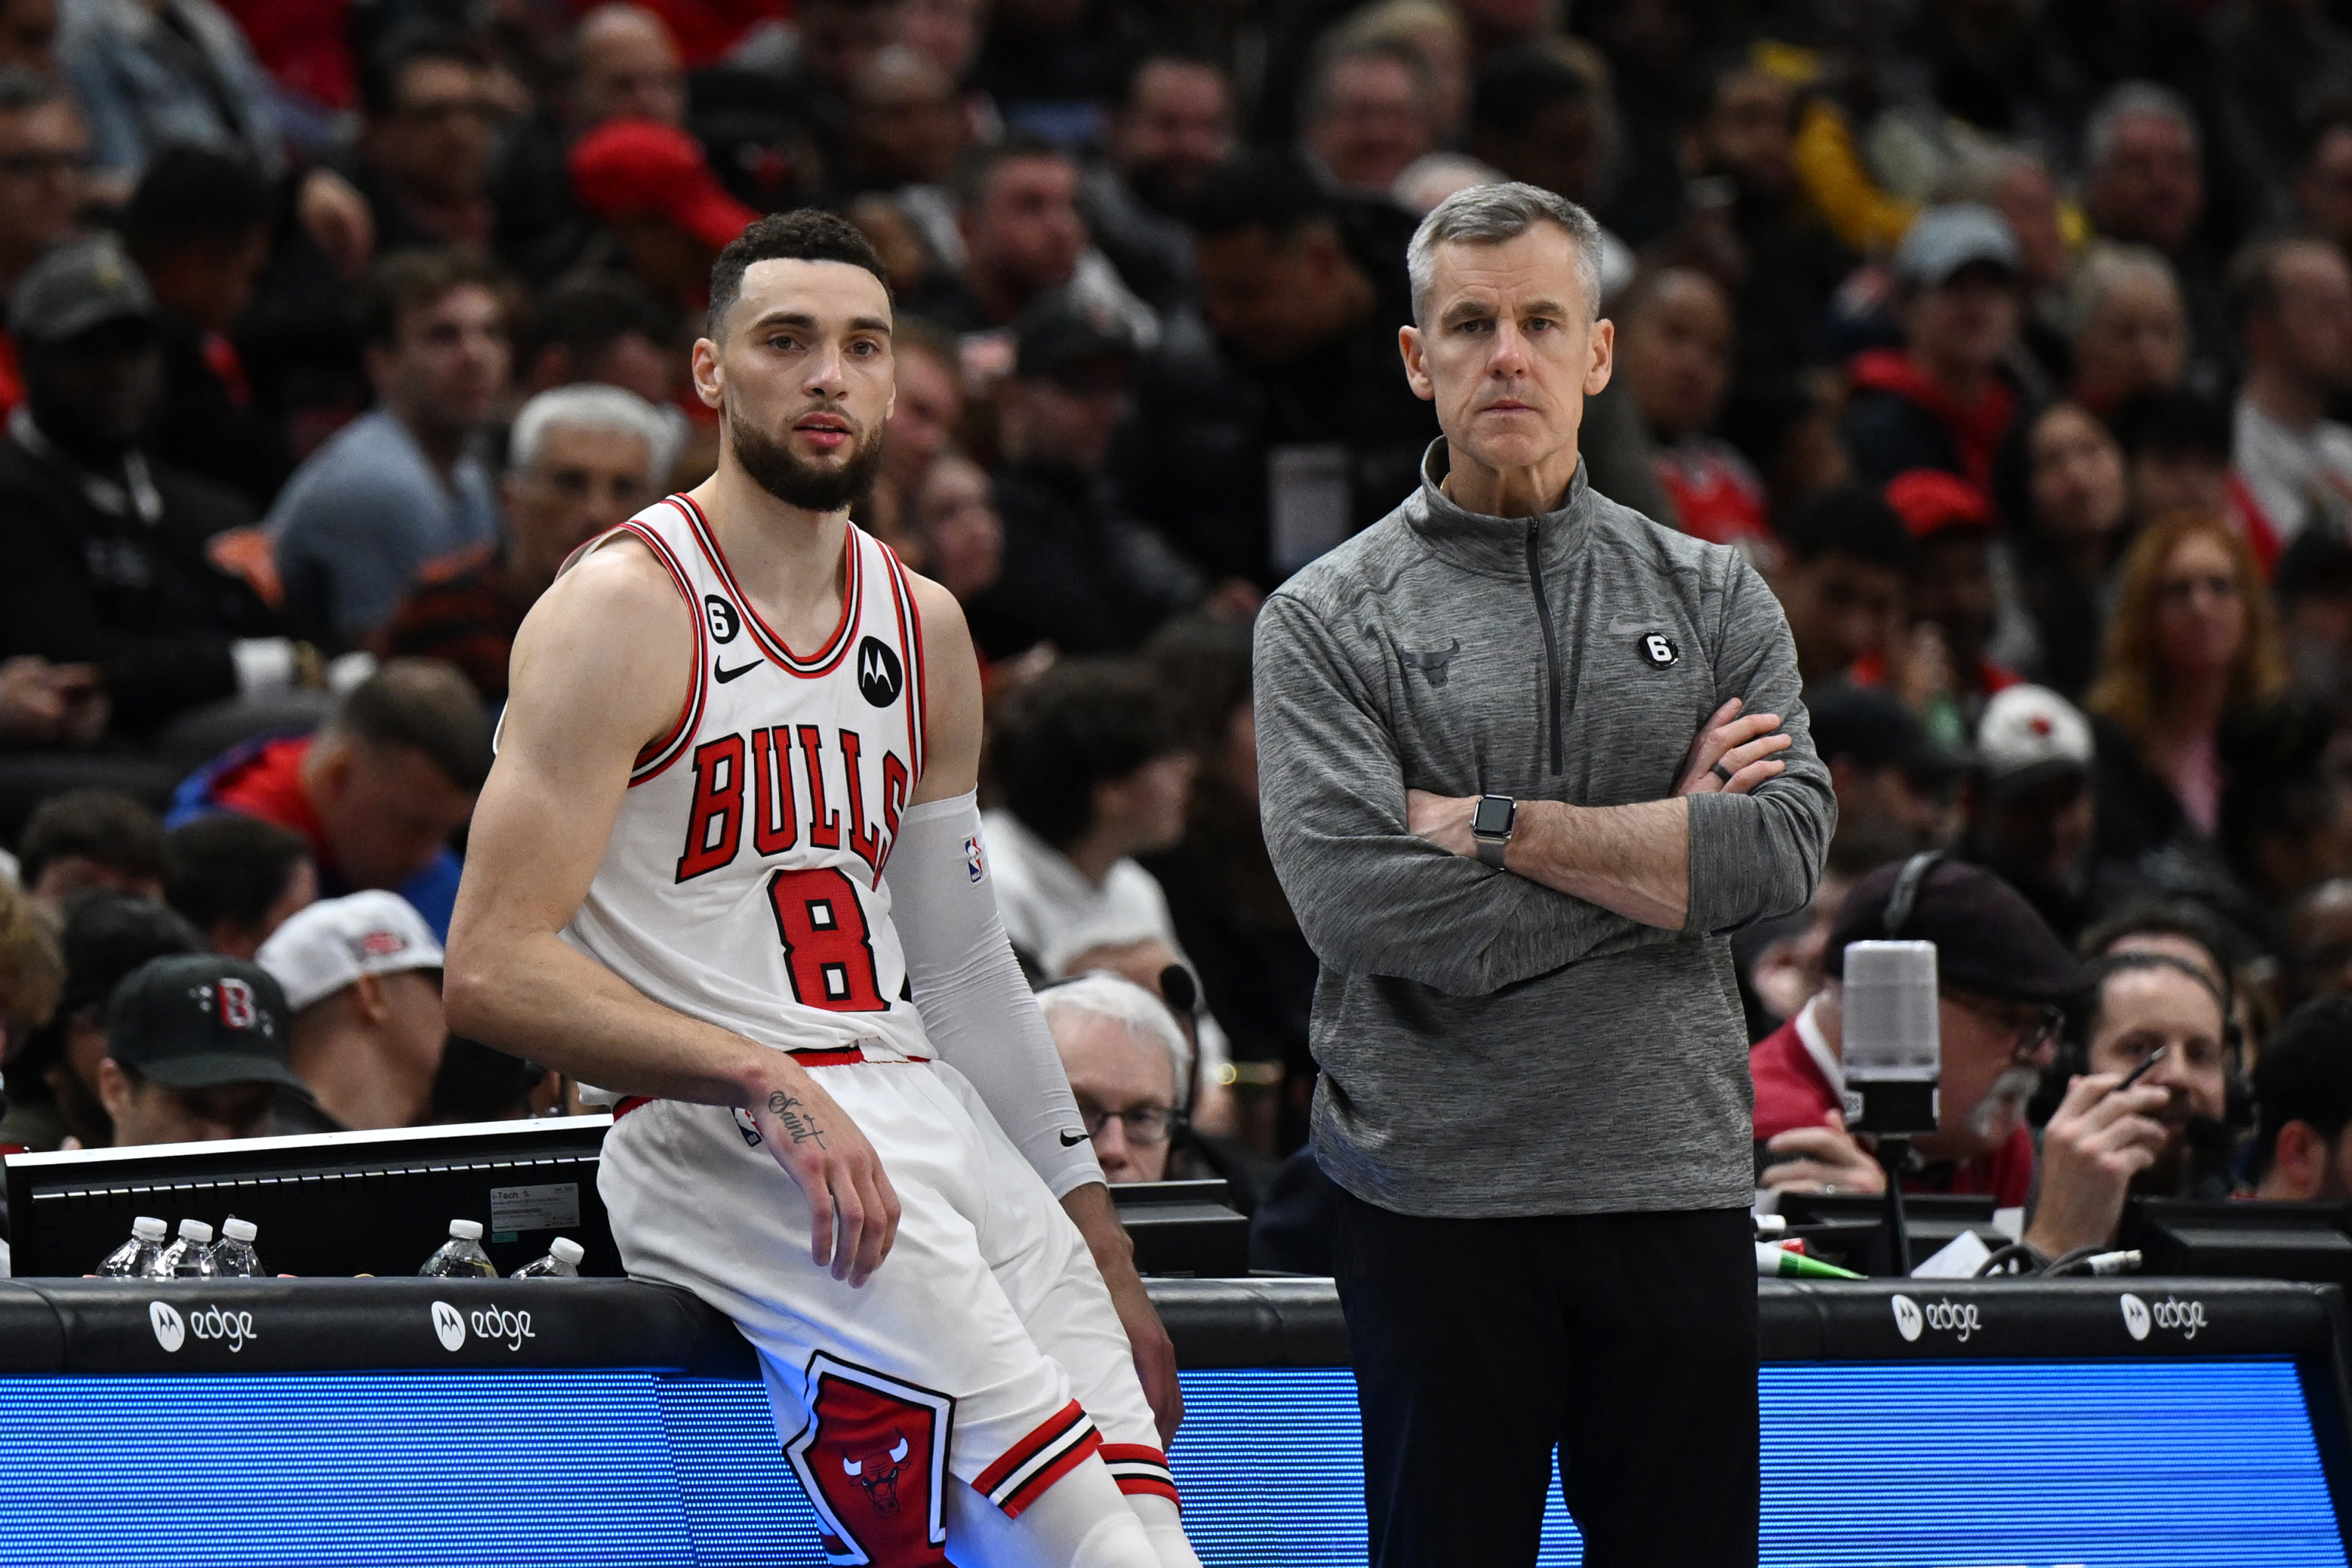 Bulls better off without Zach LaVine? Not even close, Billy